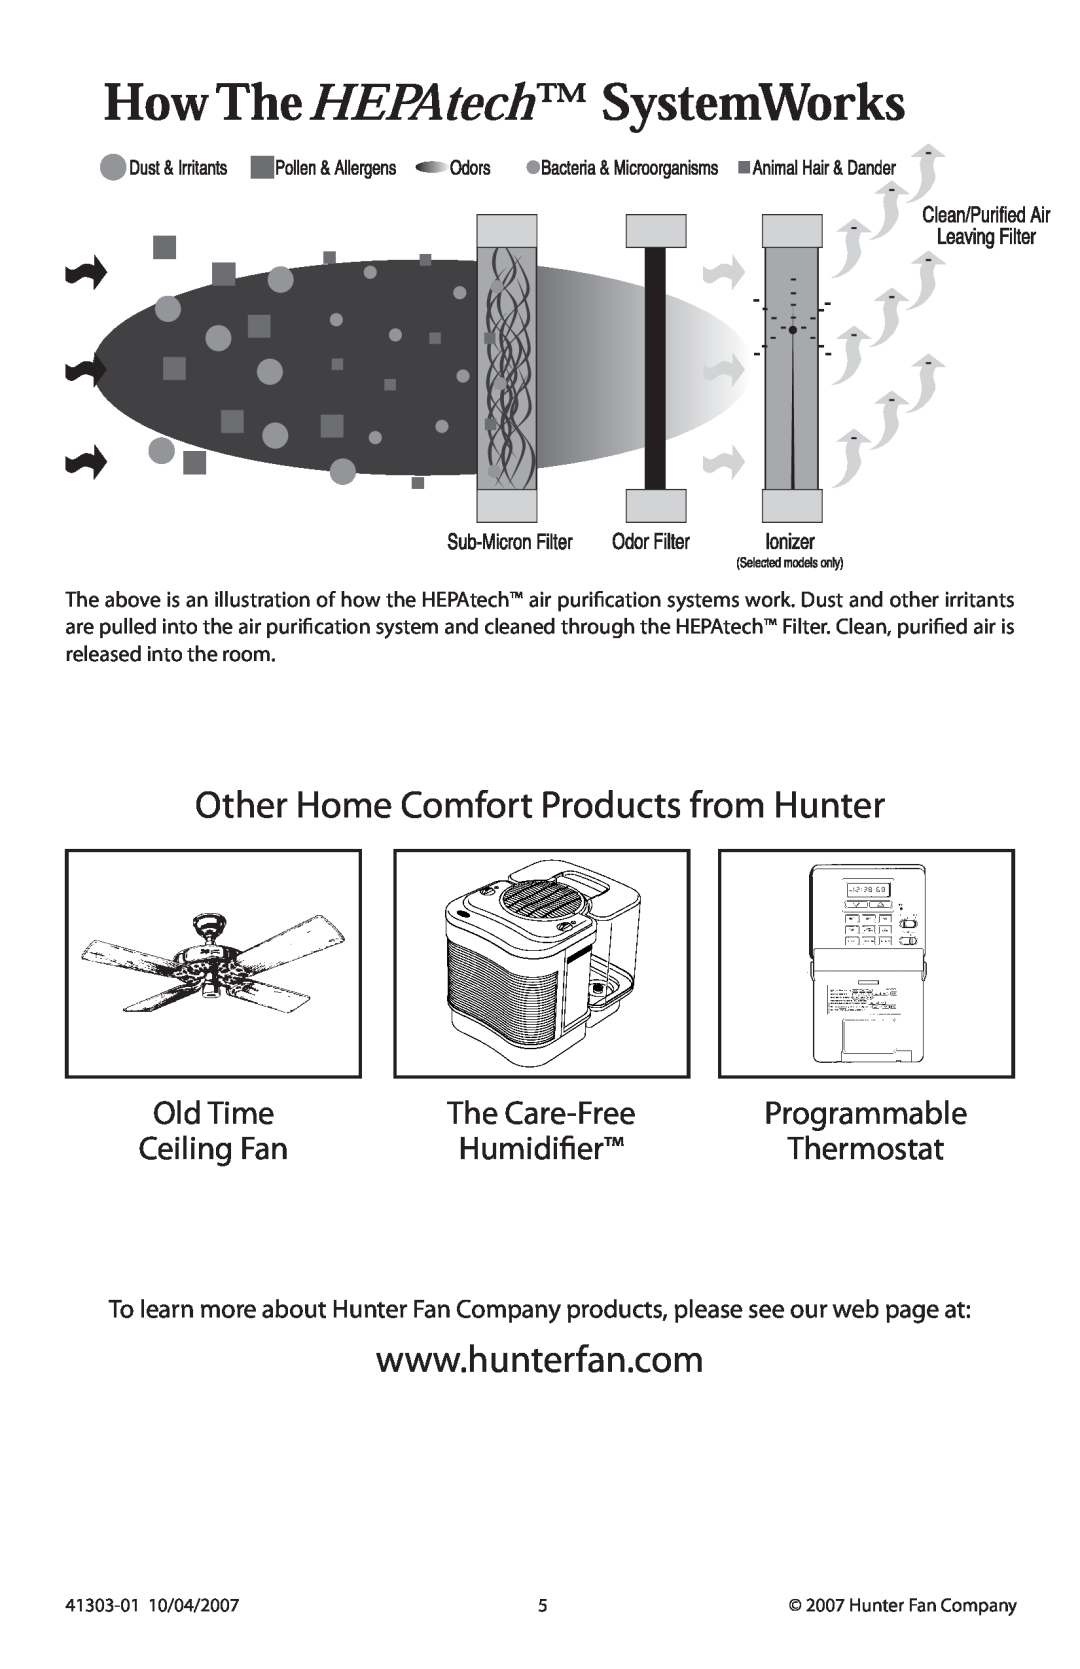 Hunter Fan 30054 Other Home Comfort Products from Hunter, Programmable, Ceiling Fan, Humidifier, Thermostat, Old Time 